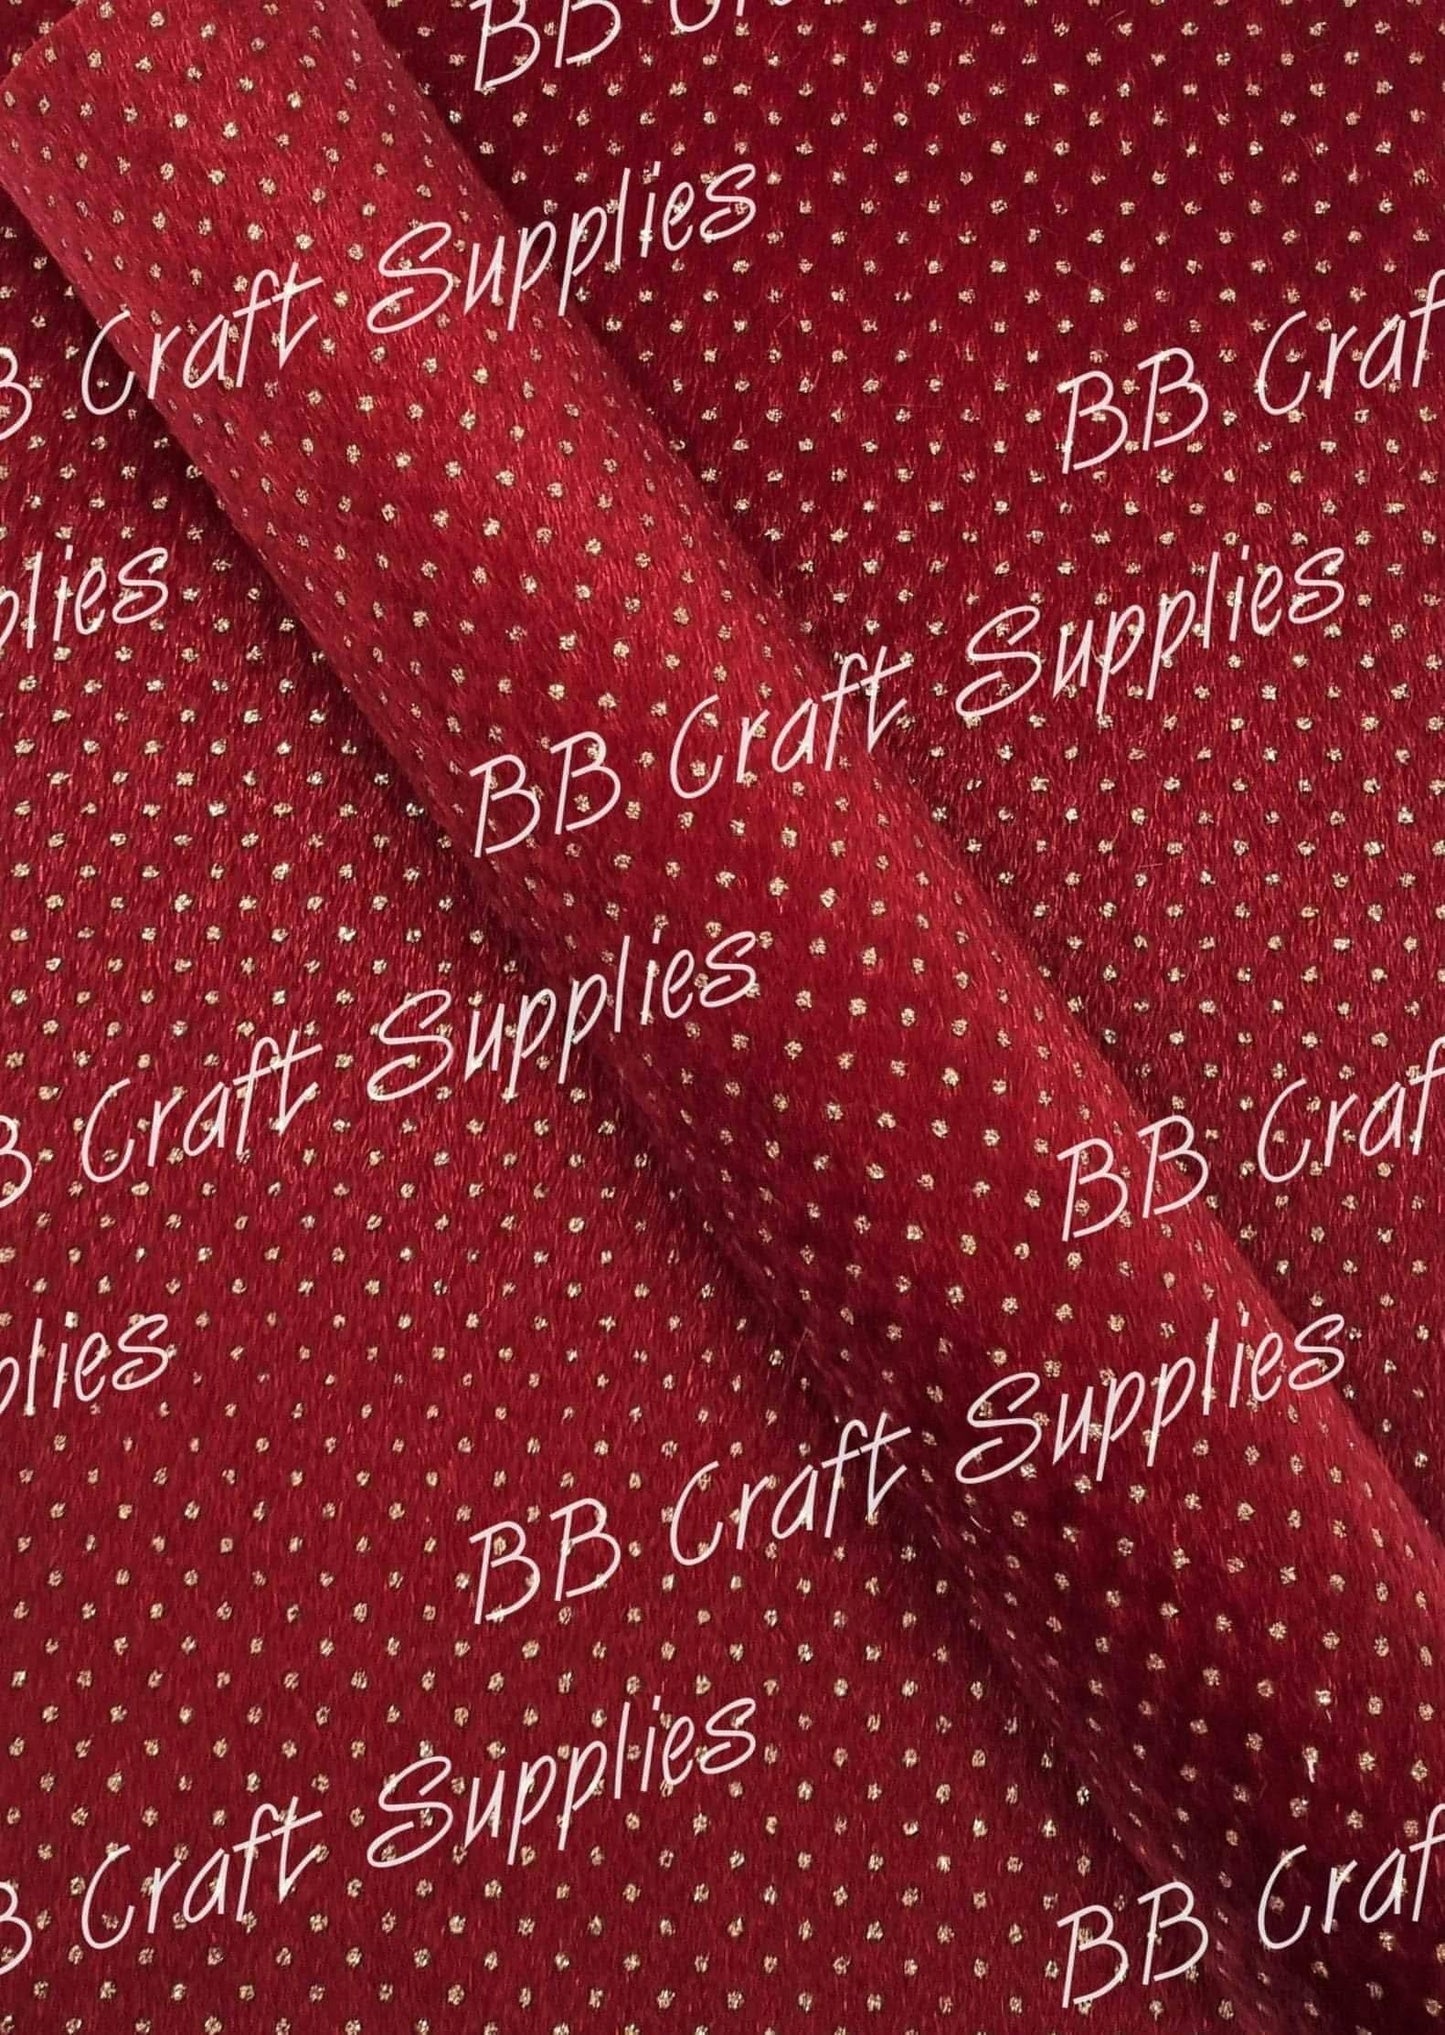 Faux Flocking Fabric Red & Gold Spots - dots, Faux, Faux Leather, flocking, fluffy, gold, red, spots, valentines - Bare Butler Faux Leather Supplies 